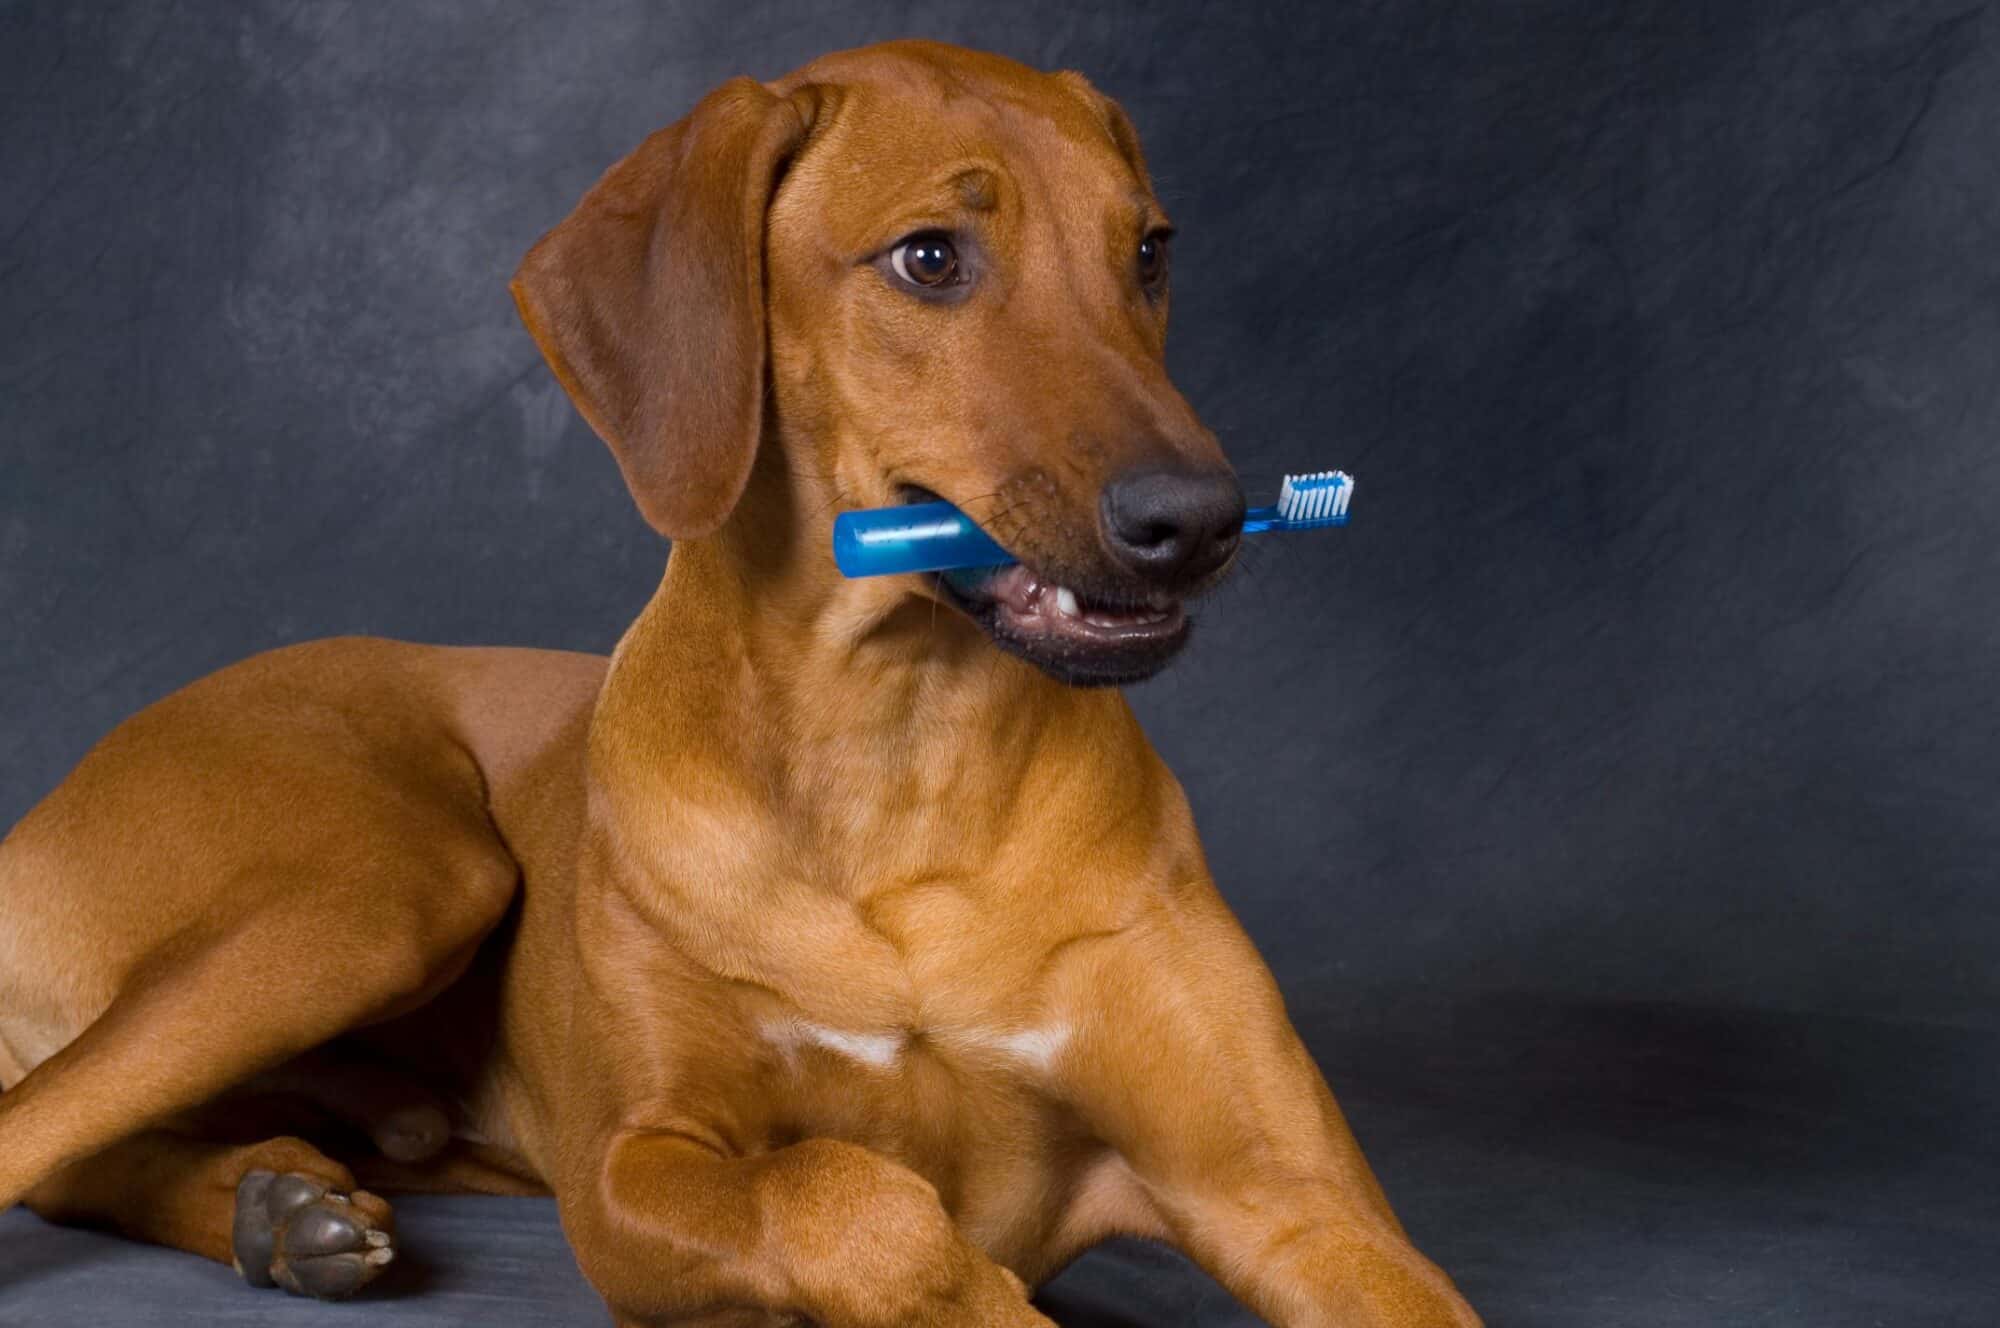 dog with toothbrush.